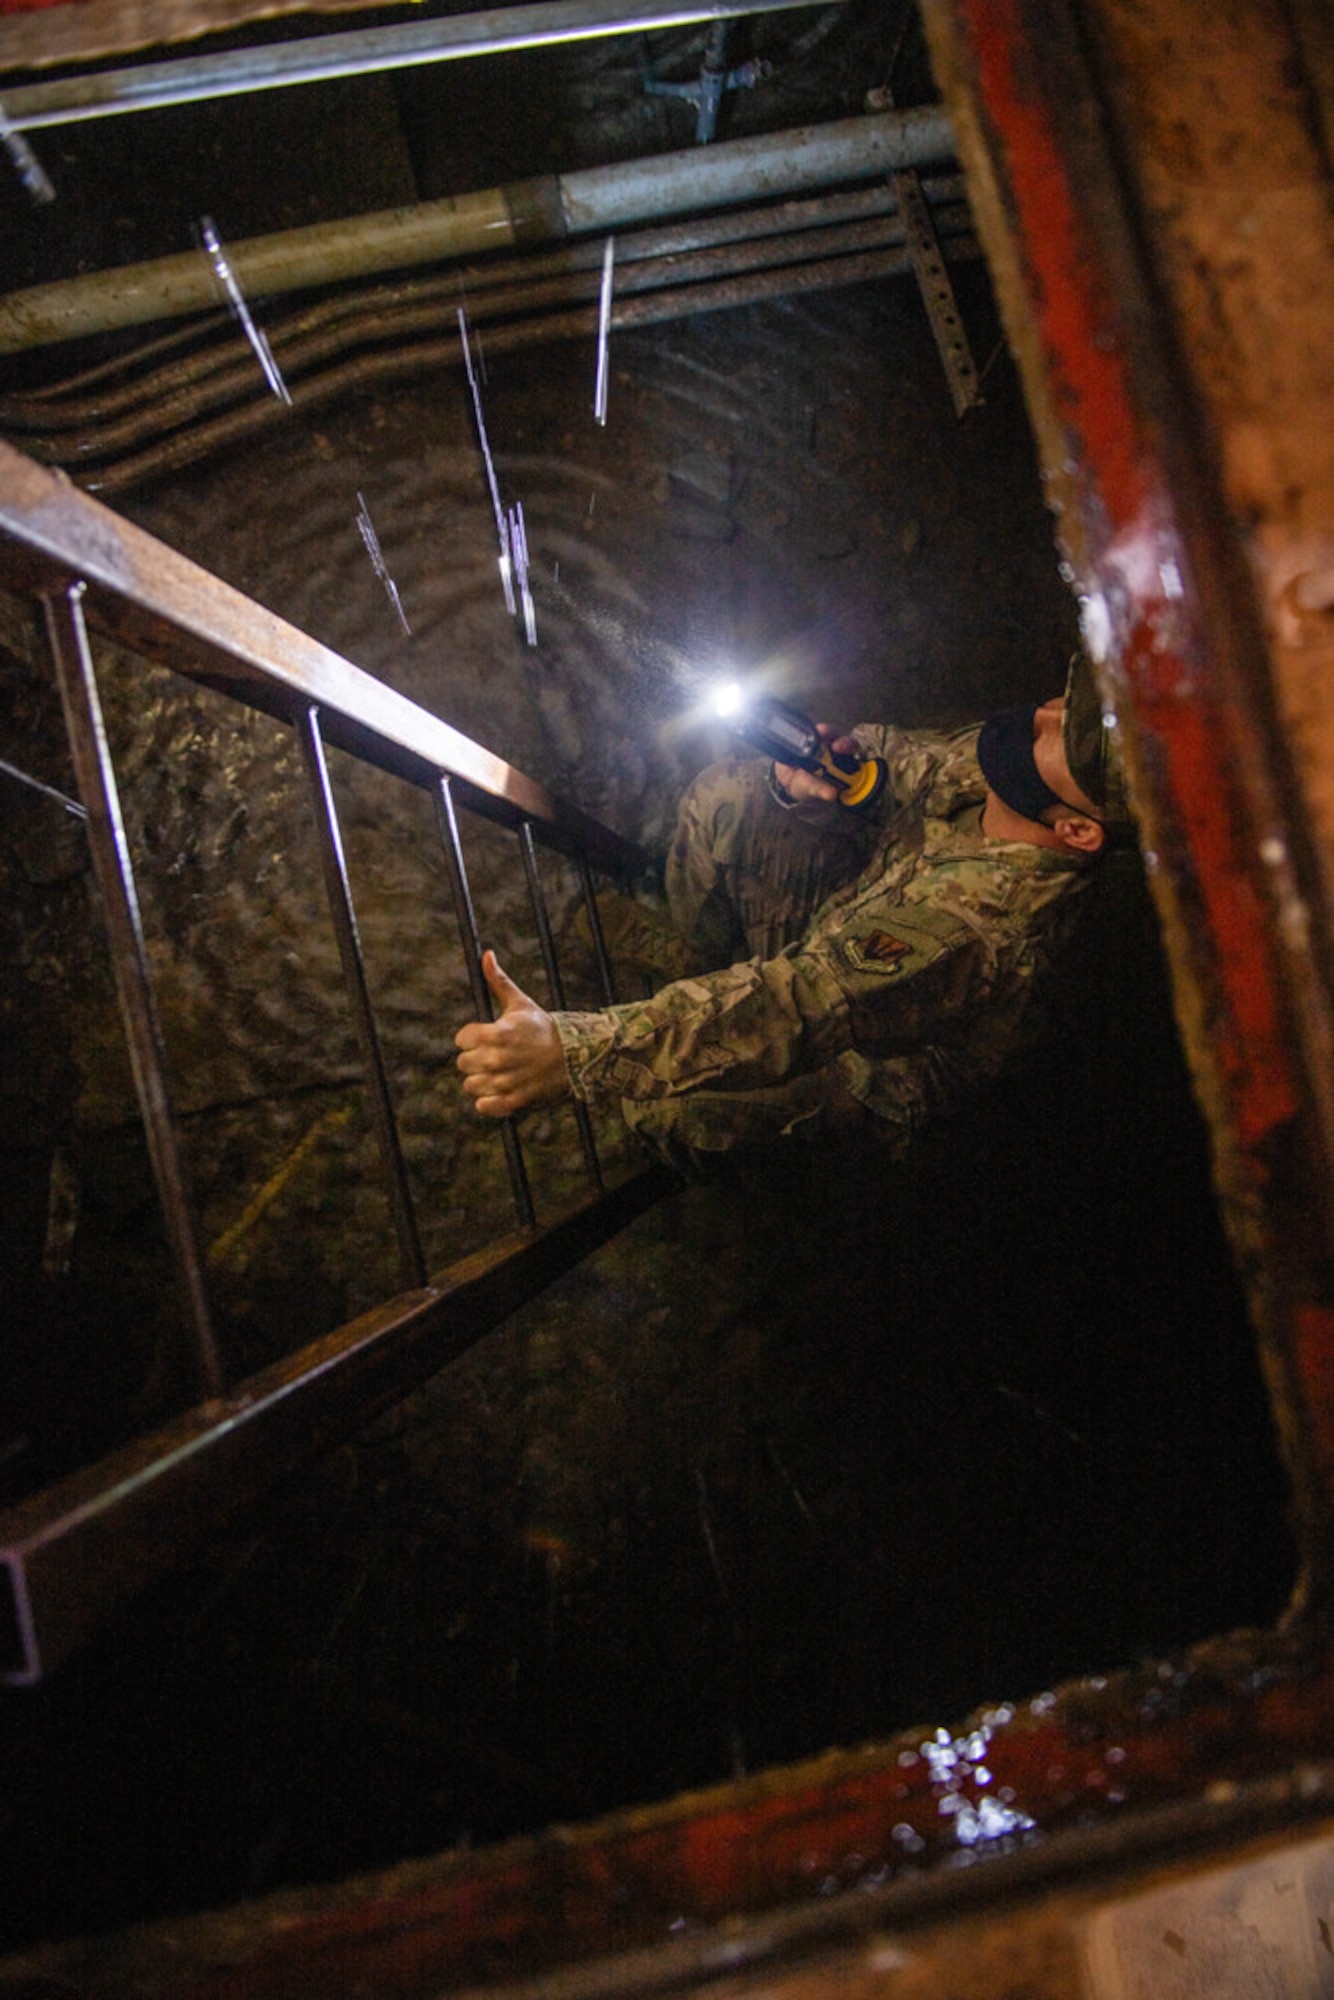 U.S. Air Force Master Sgt. Derek Hunter, 668th Alteration and Installation Squadron heating, ventilation, and air condition technician, reports damages caused by the severe winter storm lasting over five days, Feb. 19, 2021, at Joint Base San Antonio-Lackland, Texas.